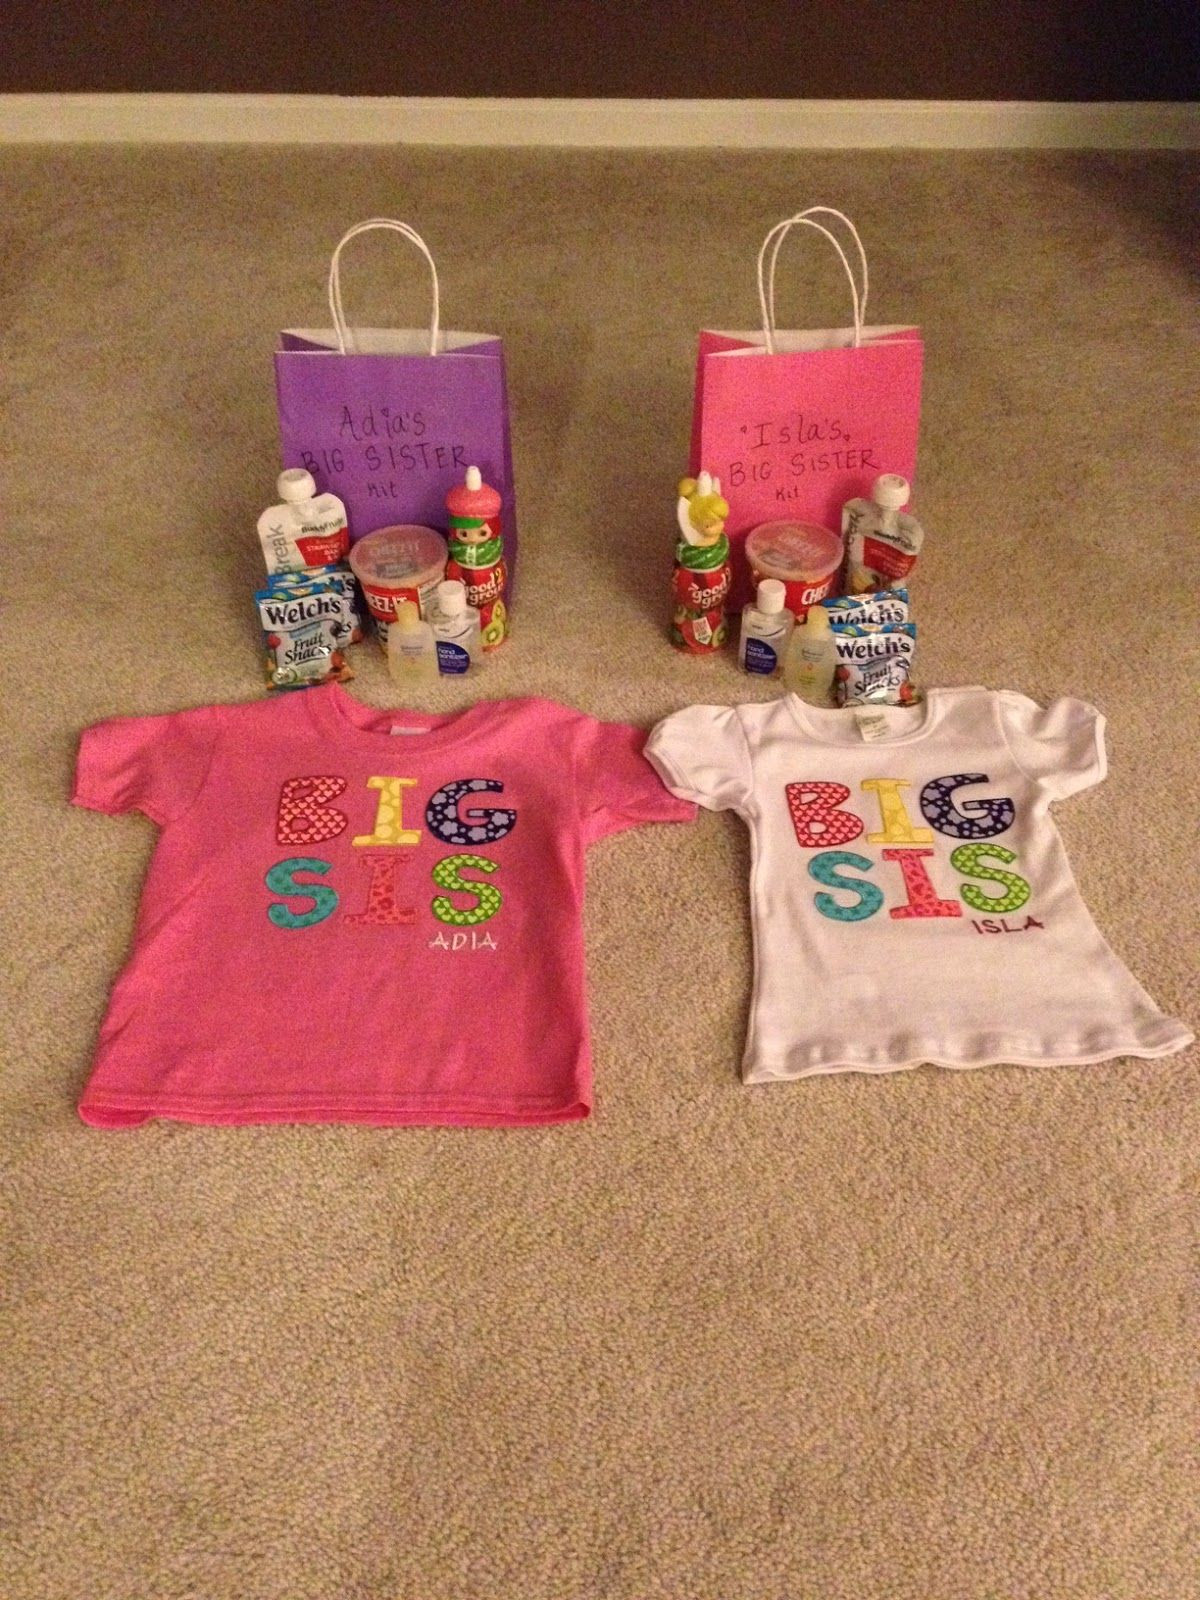 Gift Ideas From Baby To Big Sister
 Big Sister Kit or Big Brother Kit ideas